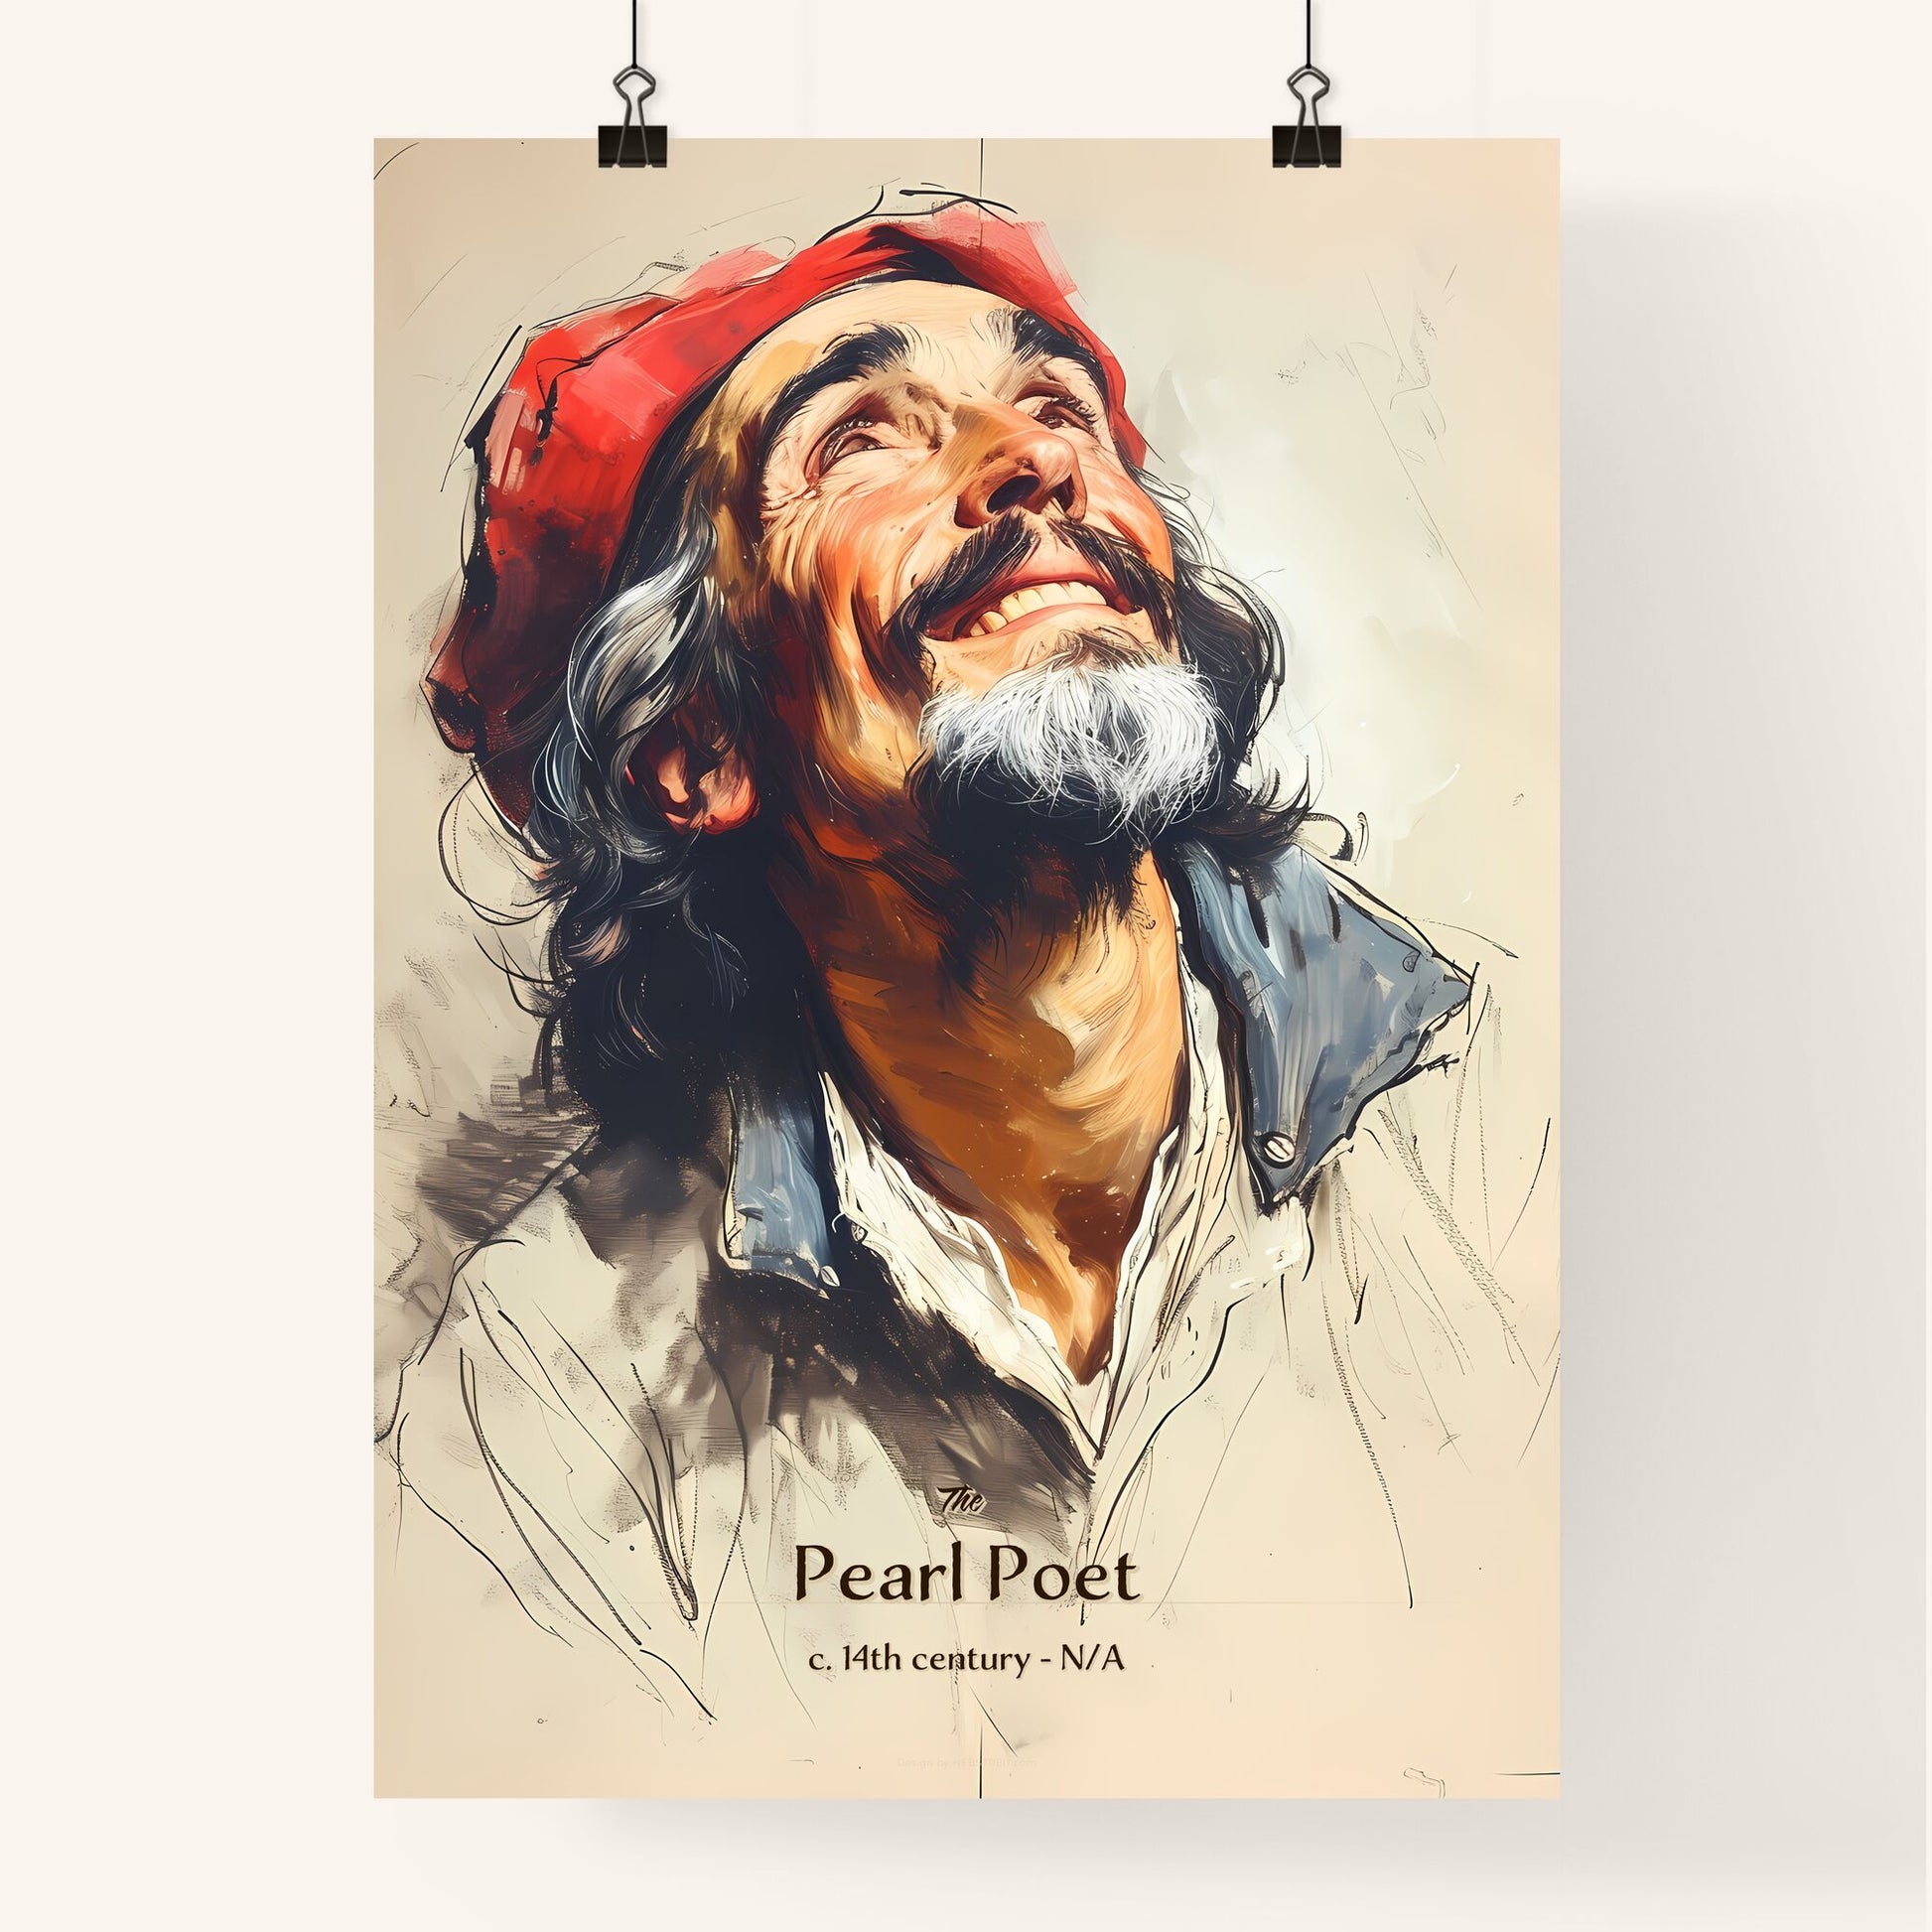 The, Pearl Poet, c. 14th century - N/A, A Poster of a man with a beard and red hat looking up Default Title